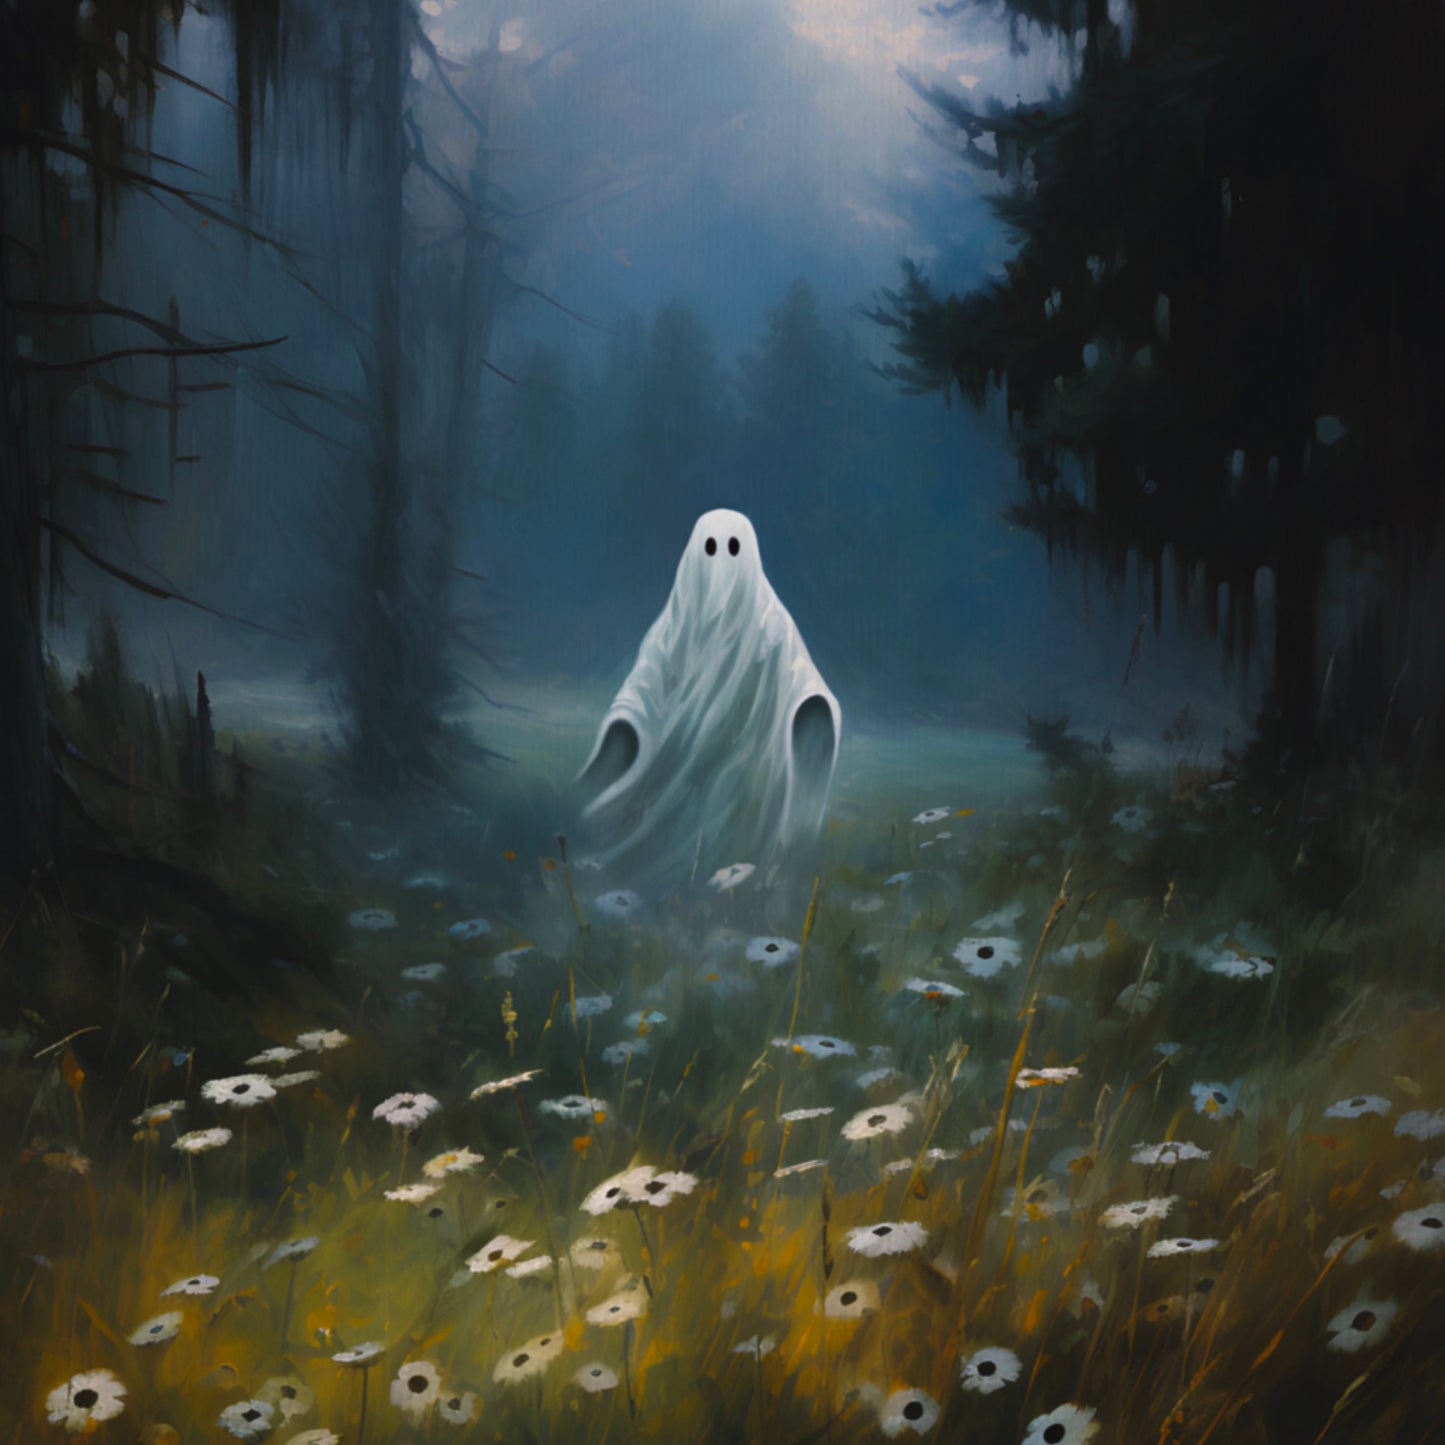 Ghost in a Field of Daisies